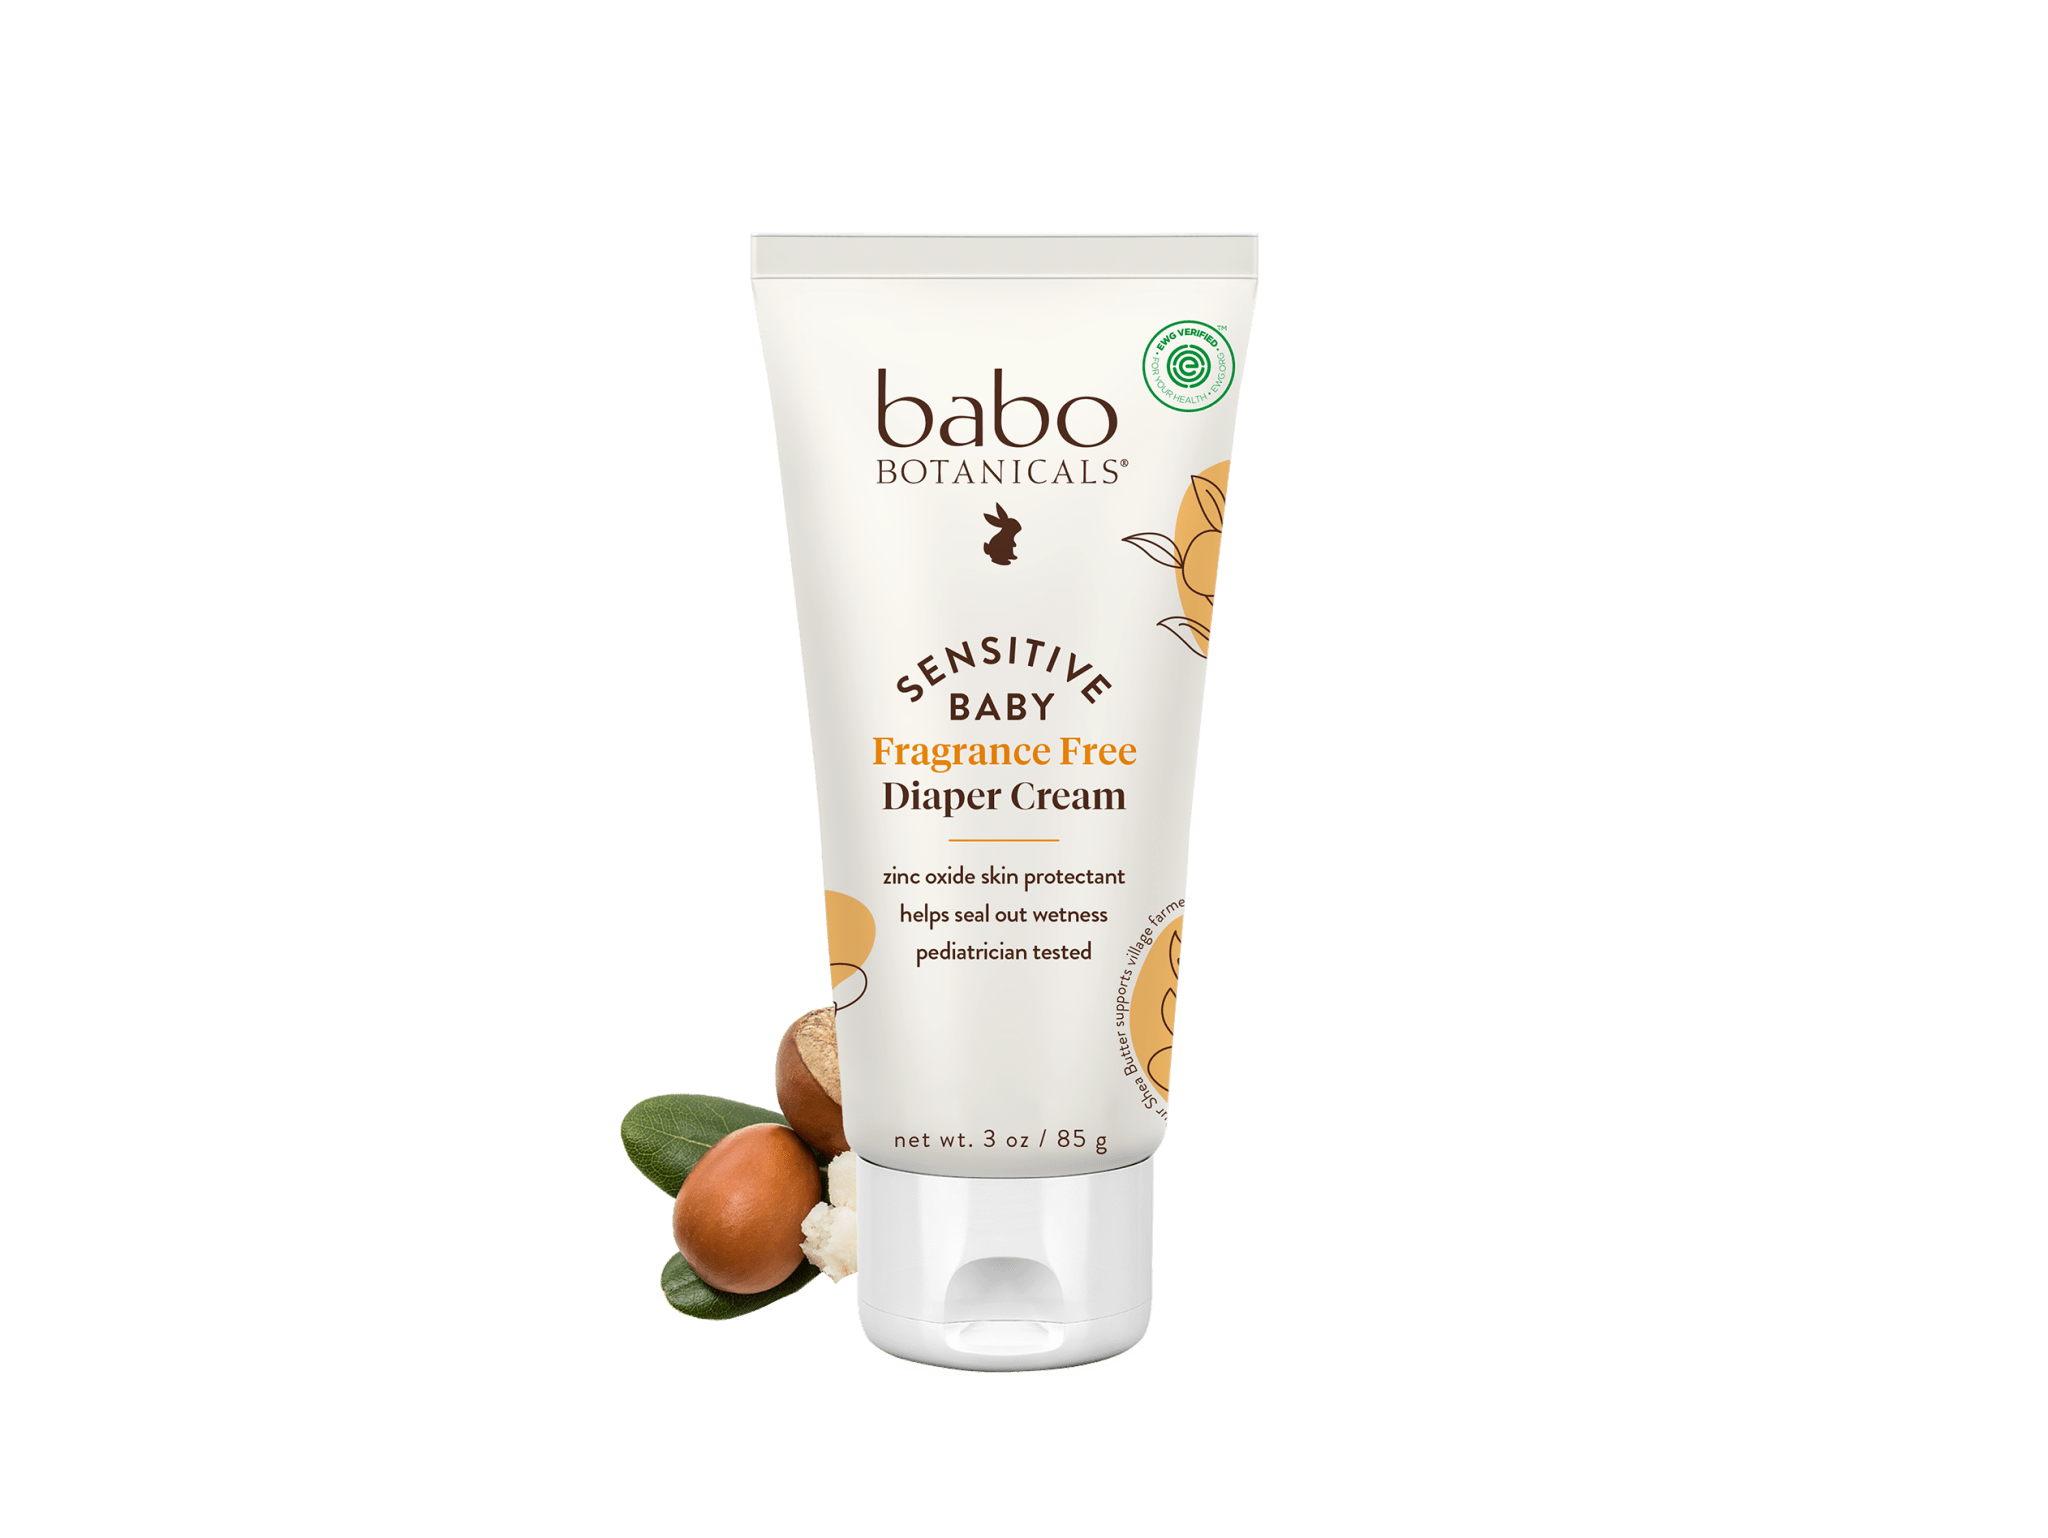 Sun Bum Baby Bum Shampoo & Wash, Natural Fragrance, 12 oz/355 mL  Ingredients and Reviews